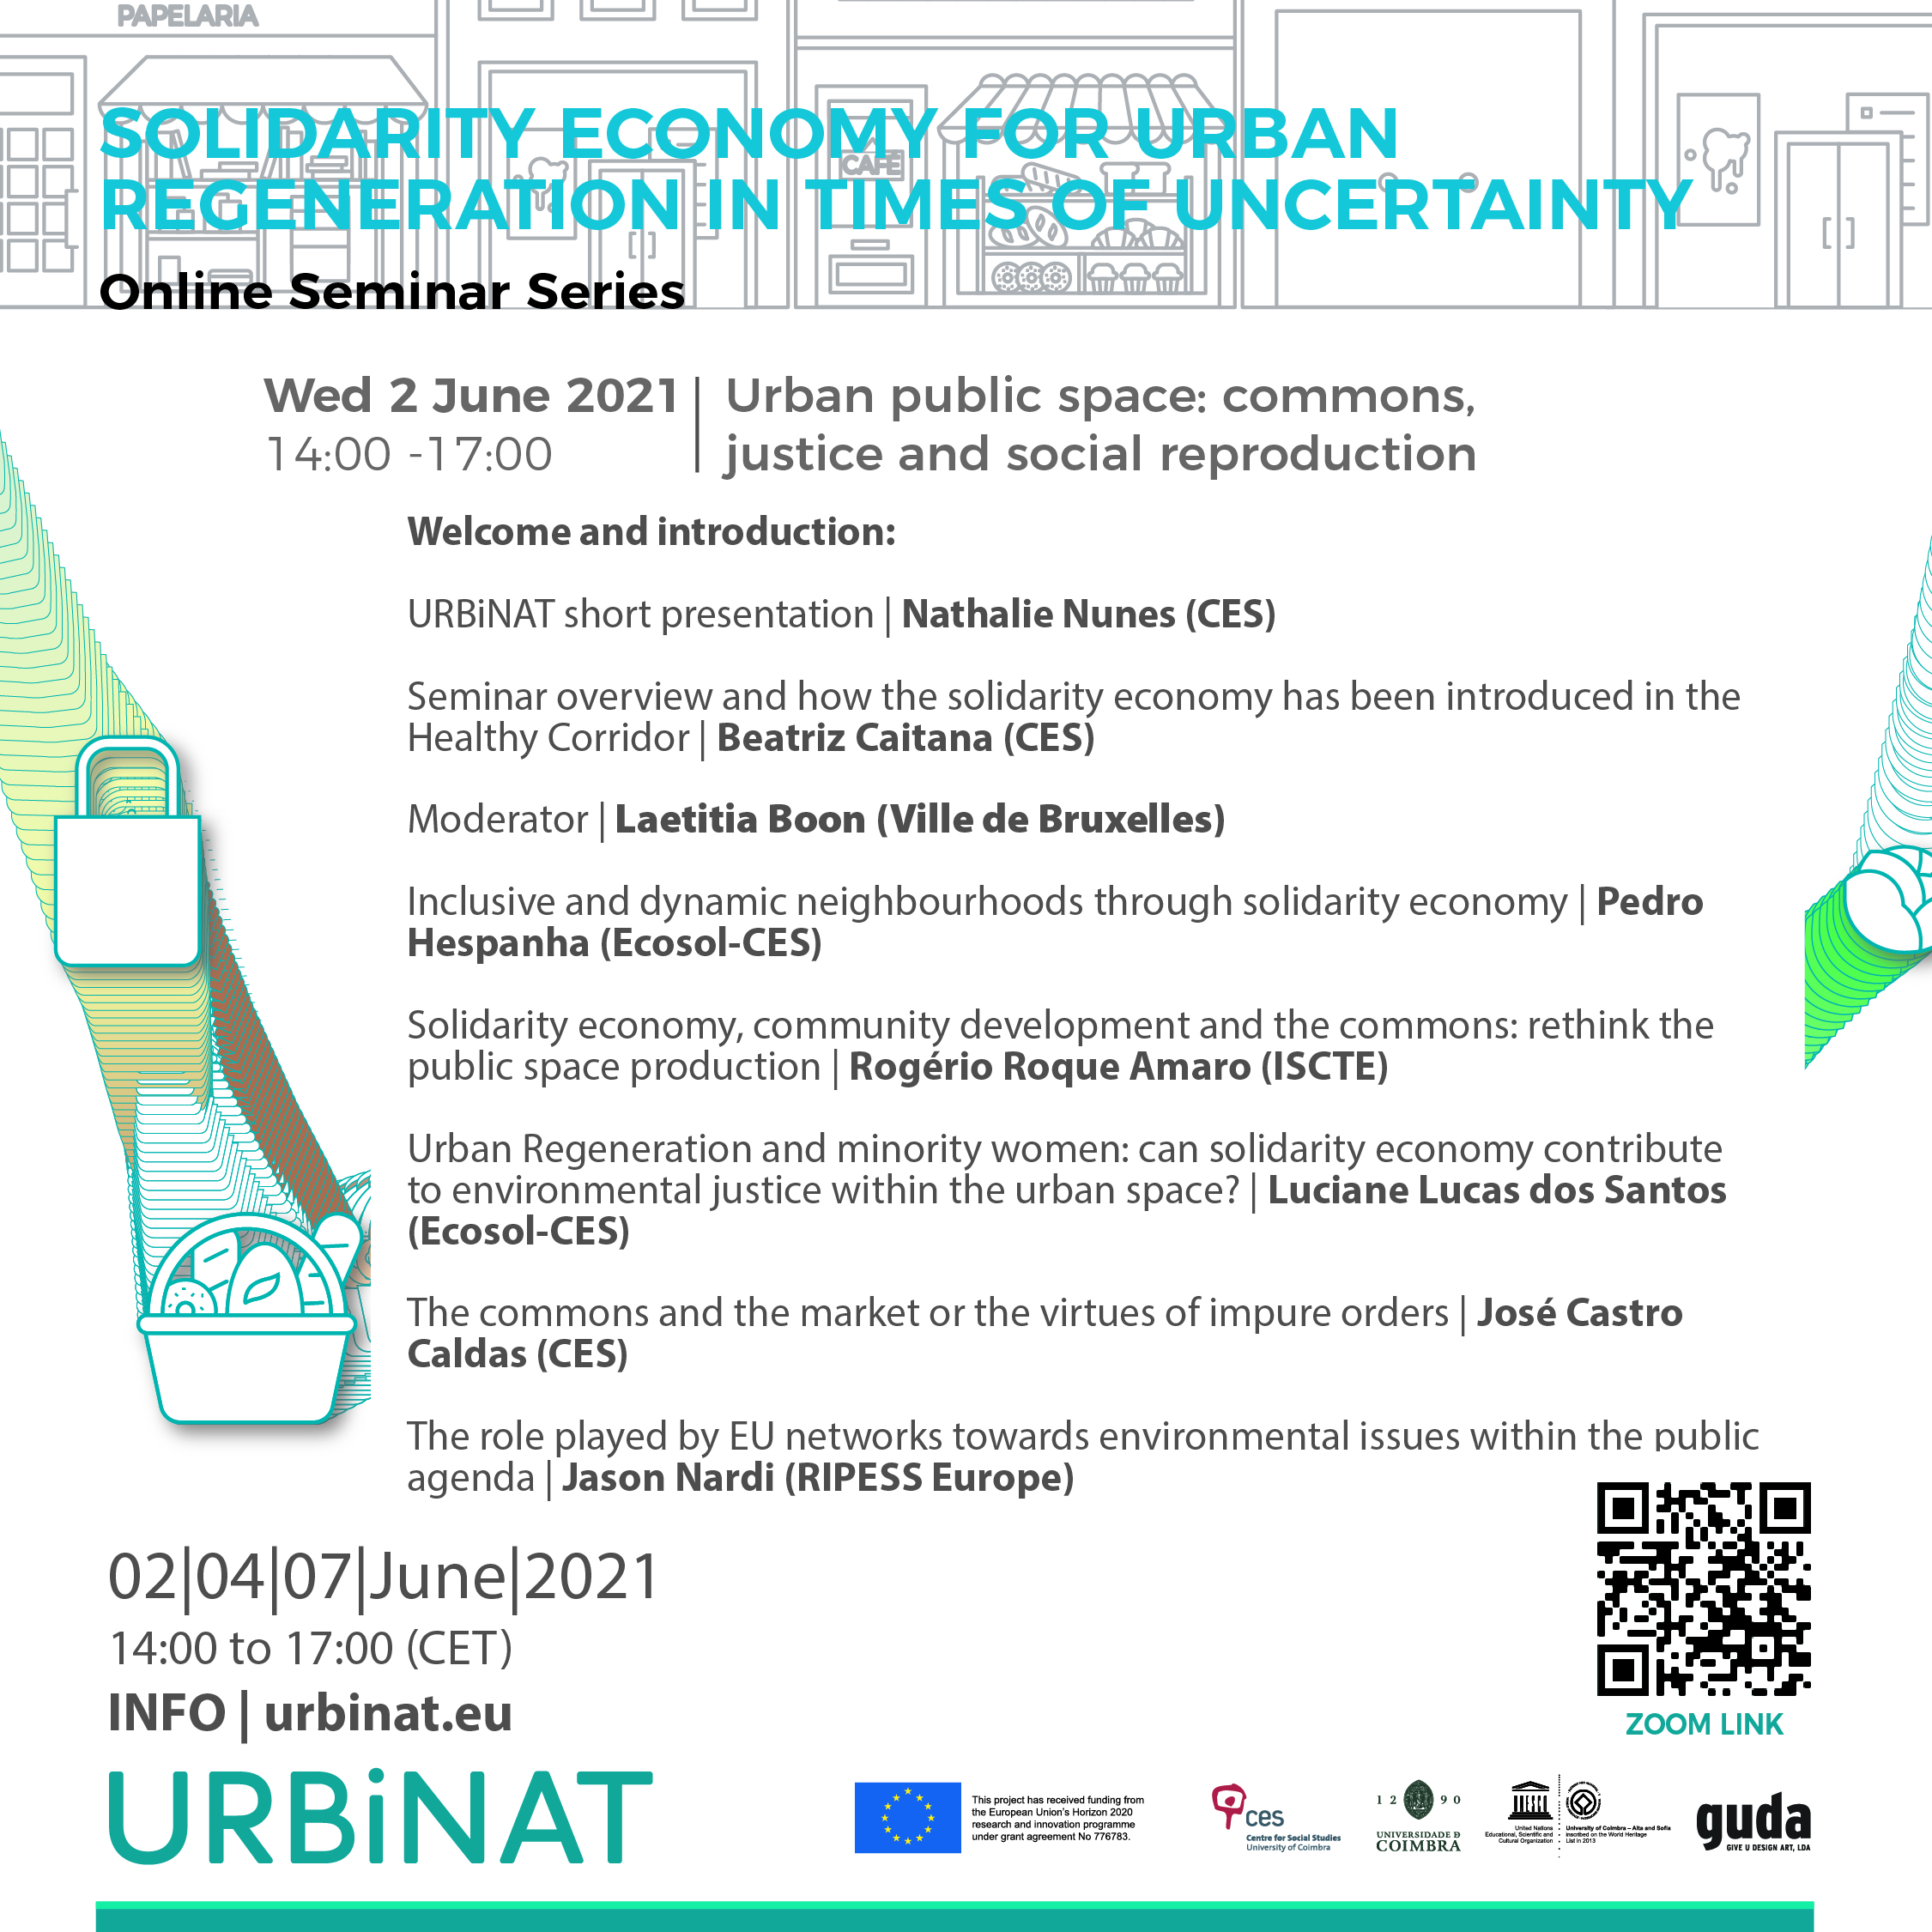 Urban public space: commons, justice and social reproduction<span id="edit_34394"><script>$(function() { $('#edit_34394').load( "/myces/user/editobj.php?tipo=evento&id=34394" ); });</script></span>